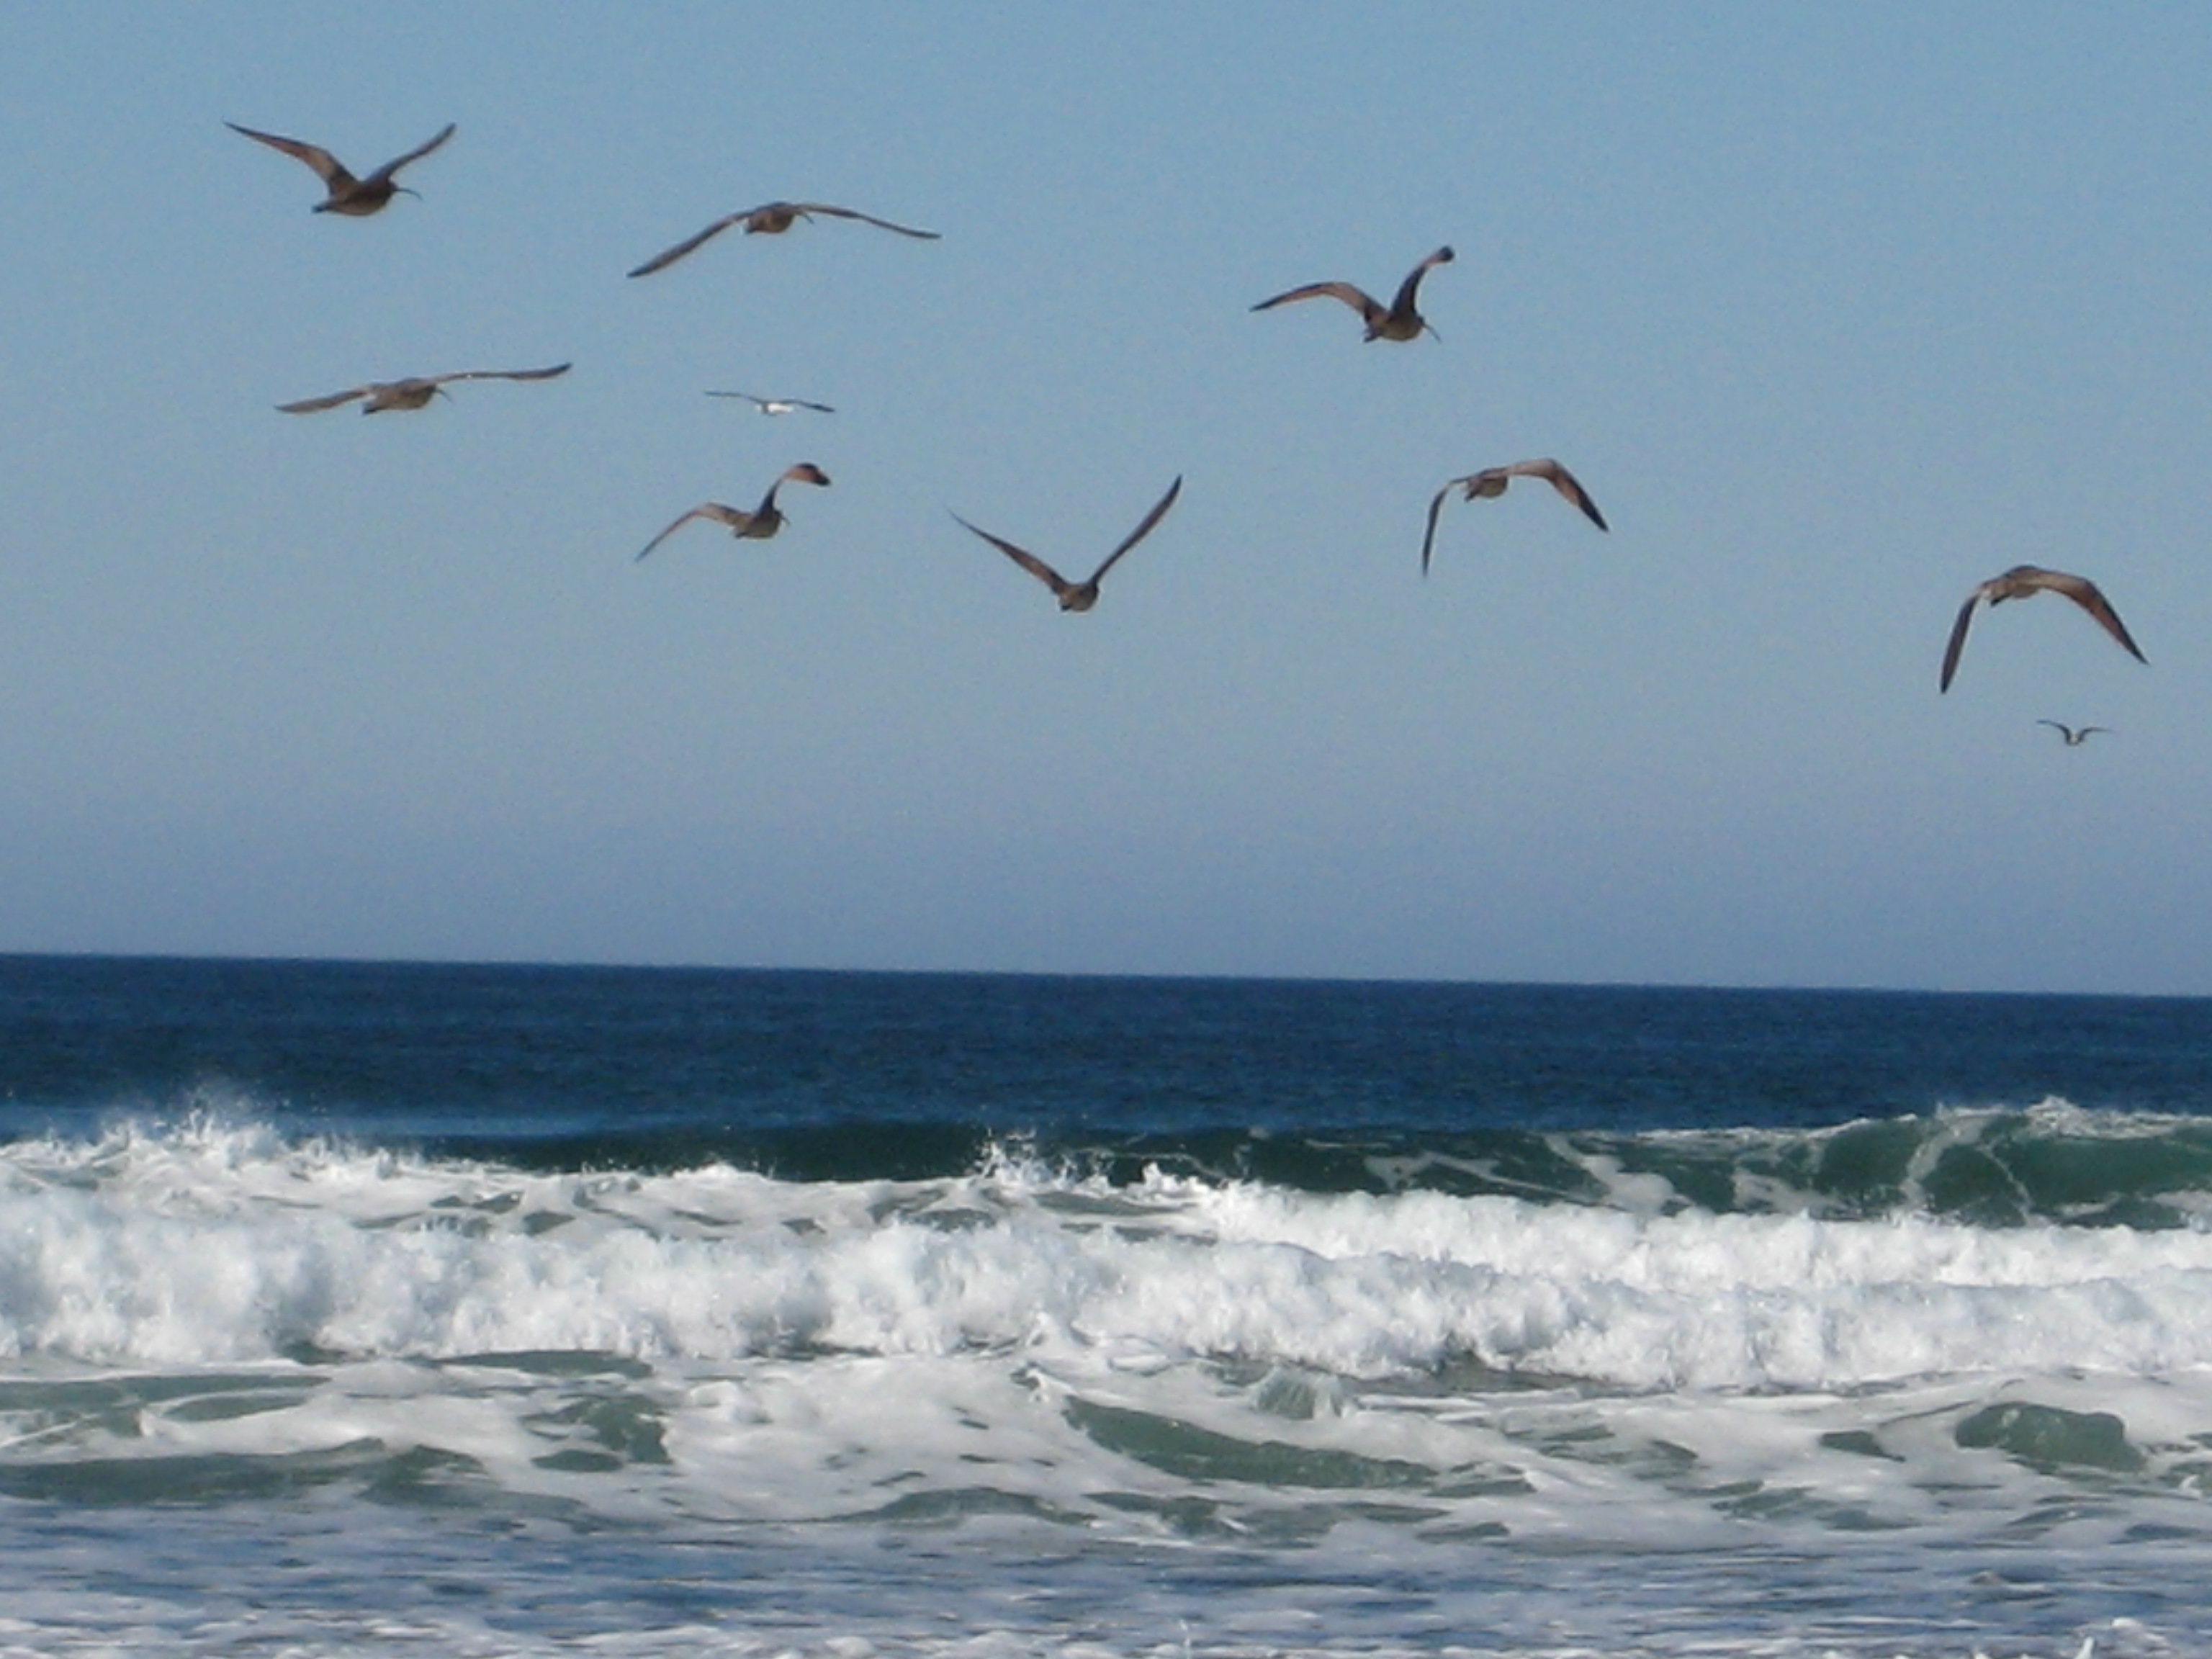 Seabirds flying over the waves at Morro Bay, California. 